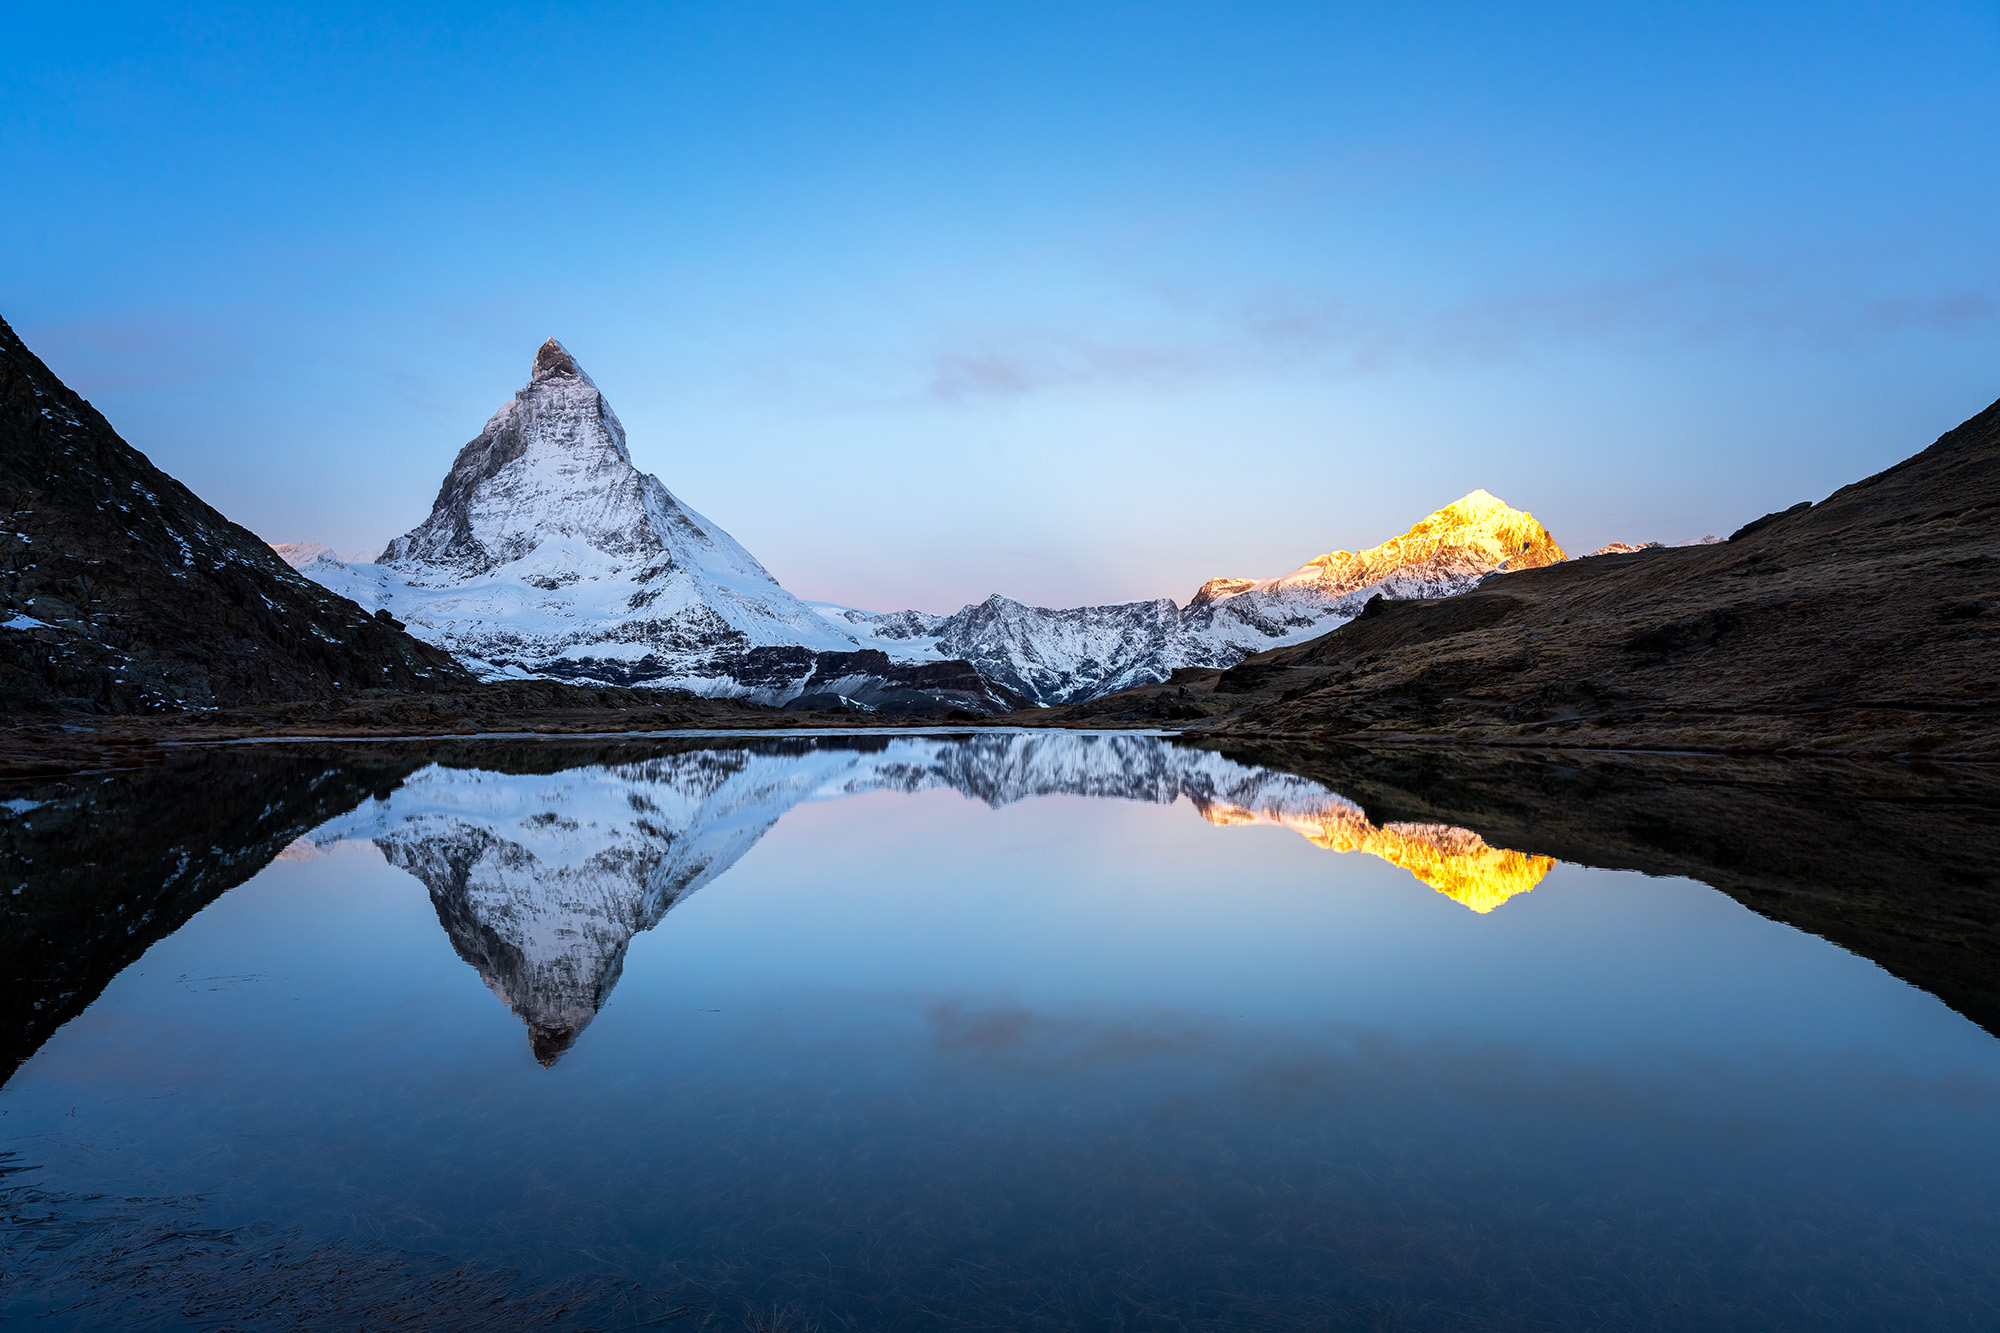 In "Matterhorn's Dawn Reflection," the moment just before sunrise bathes the Swiss landscape in a gentle transition from blue...